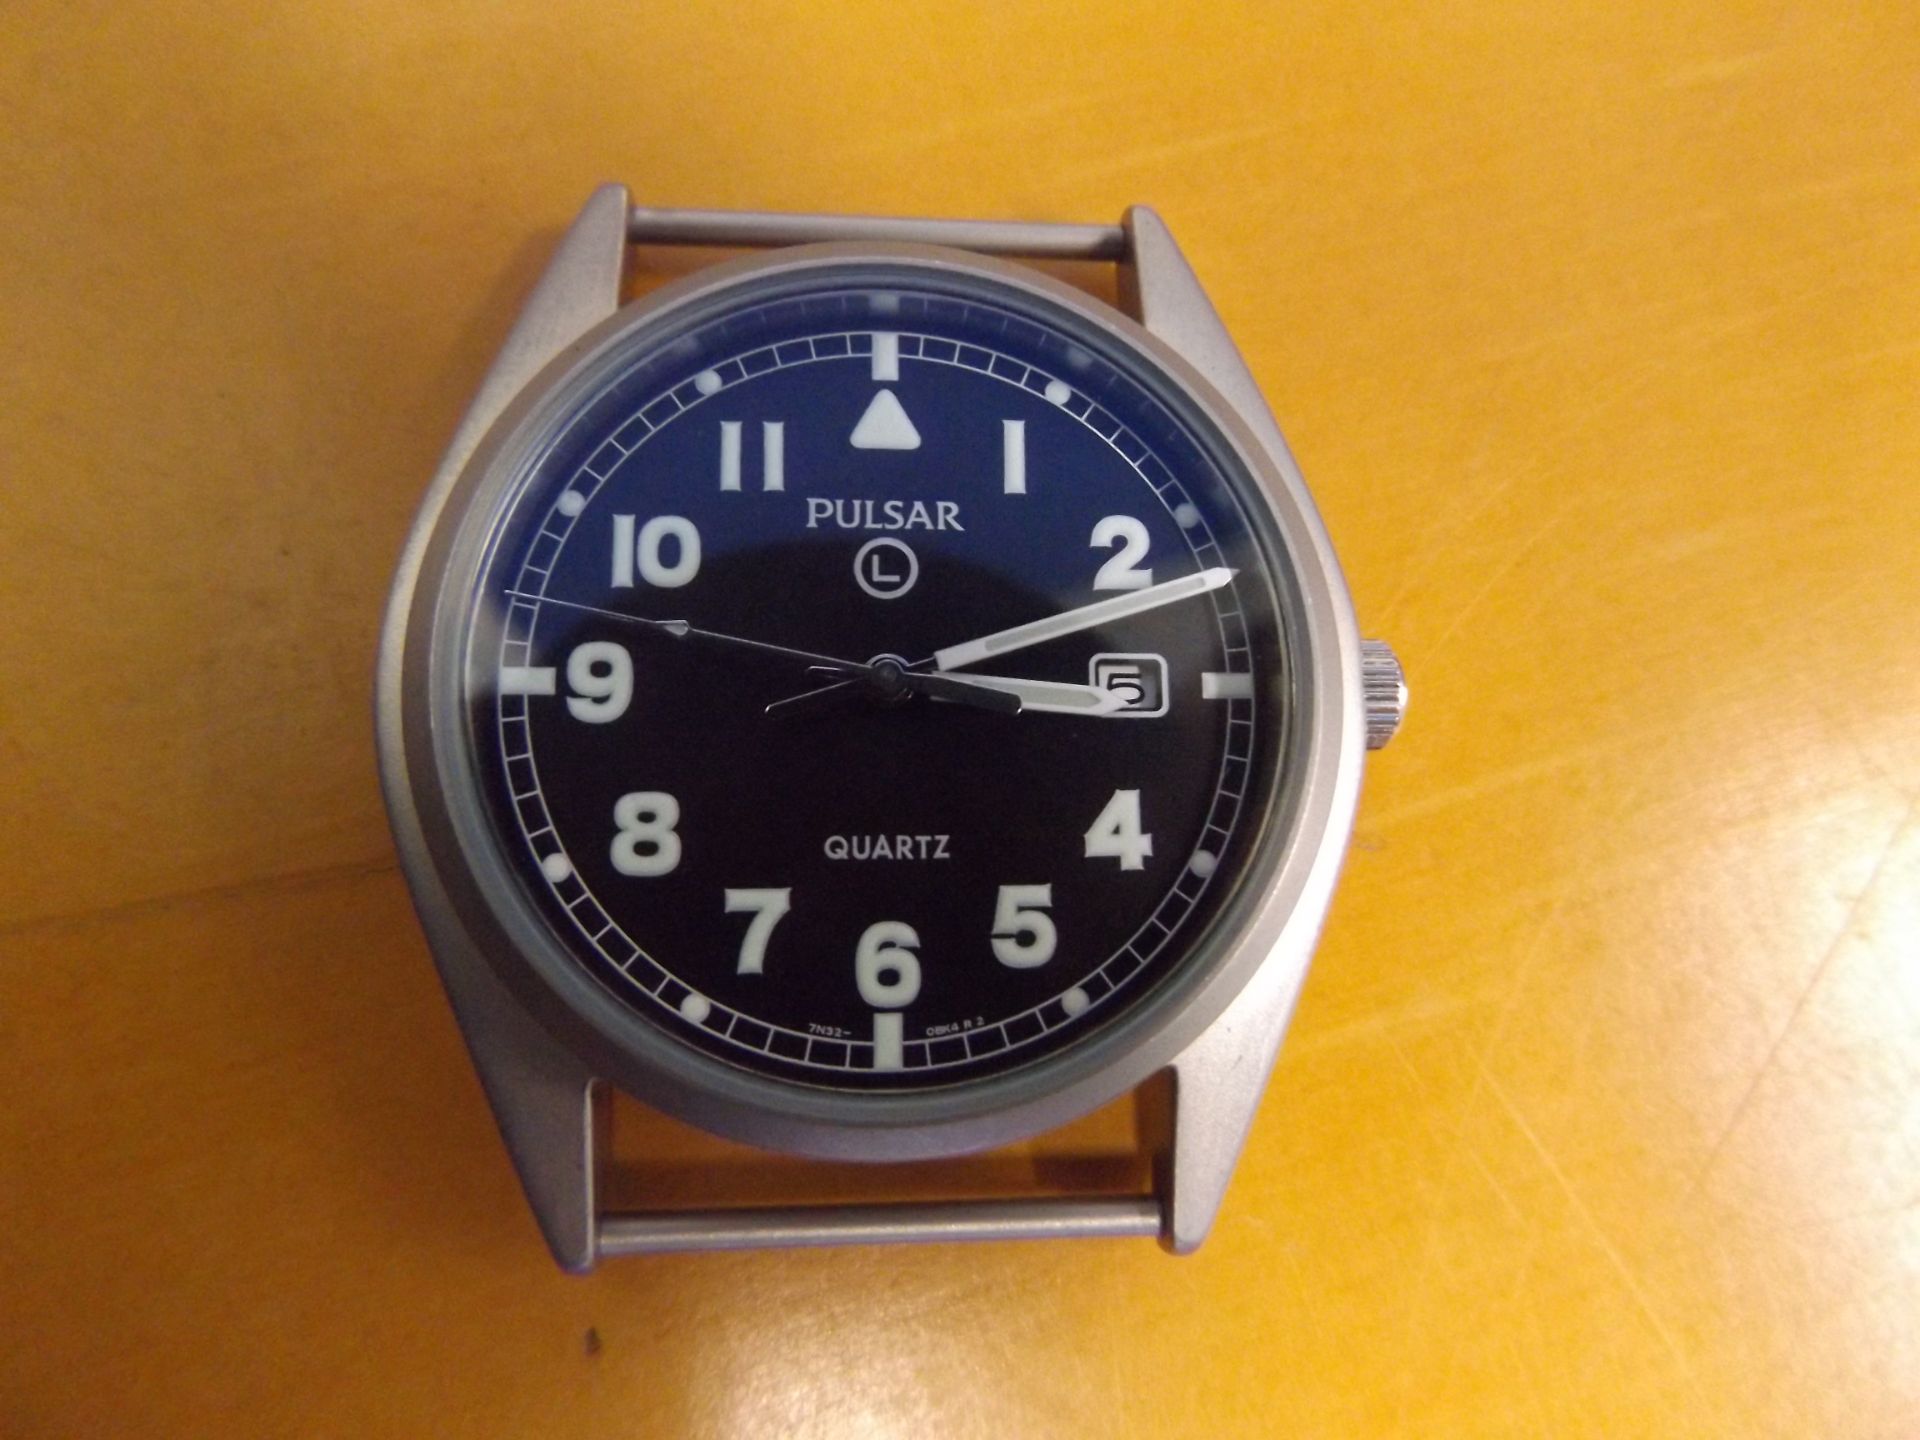 Unissued Pulsar G10 wrist watch - Afghan Issue - Image 3 of 7